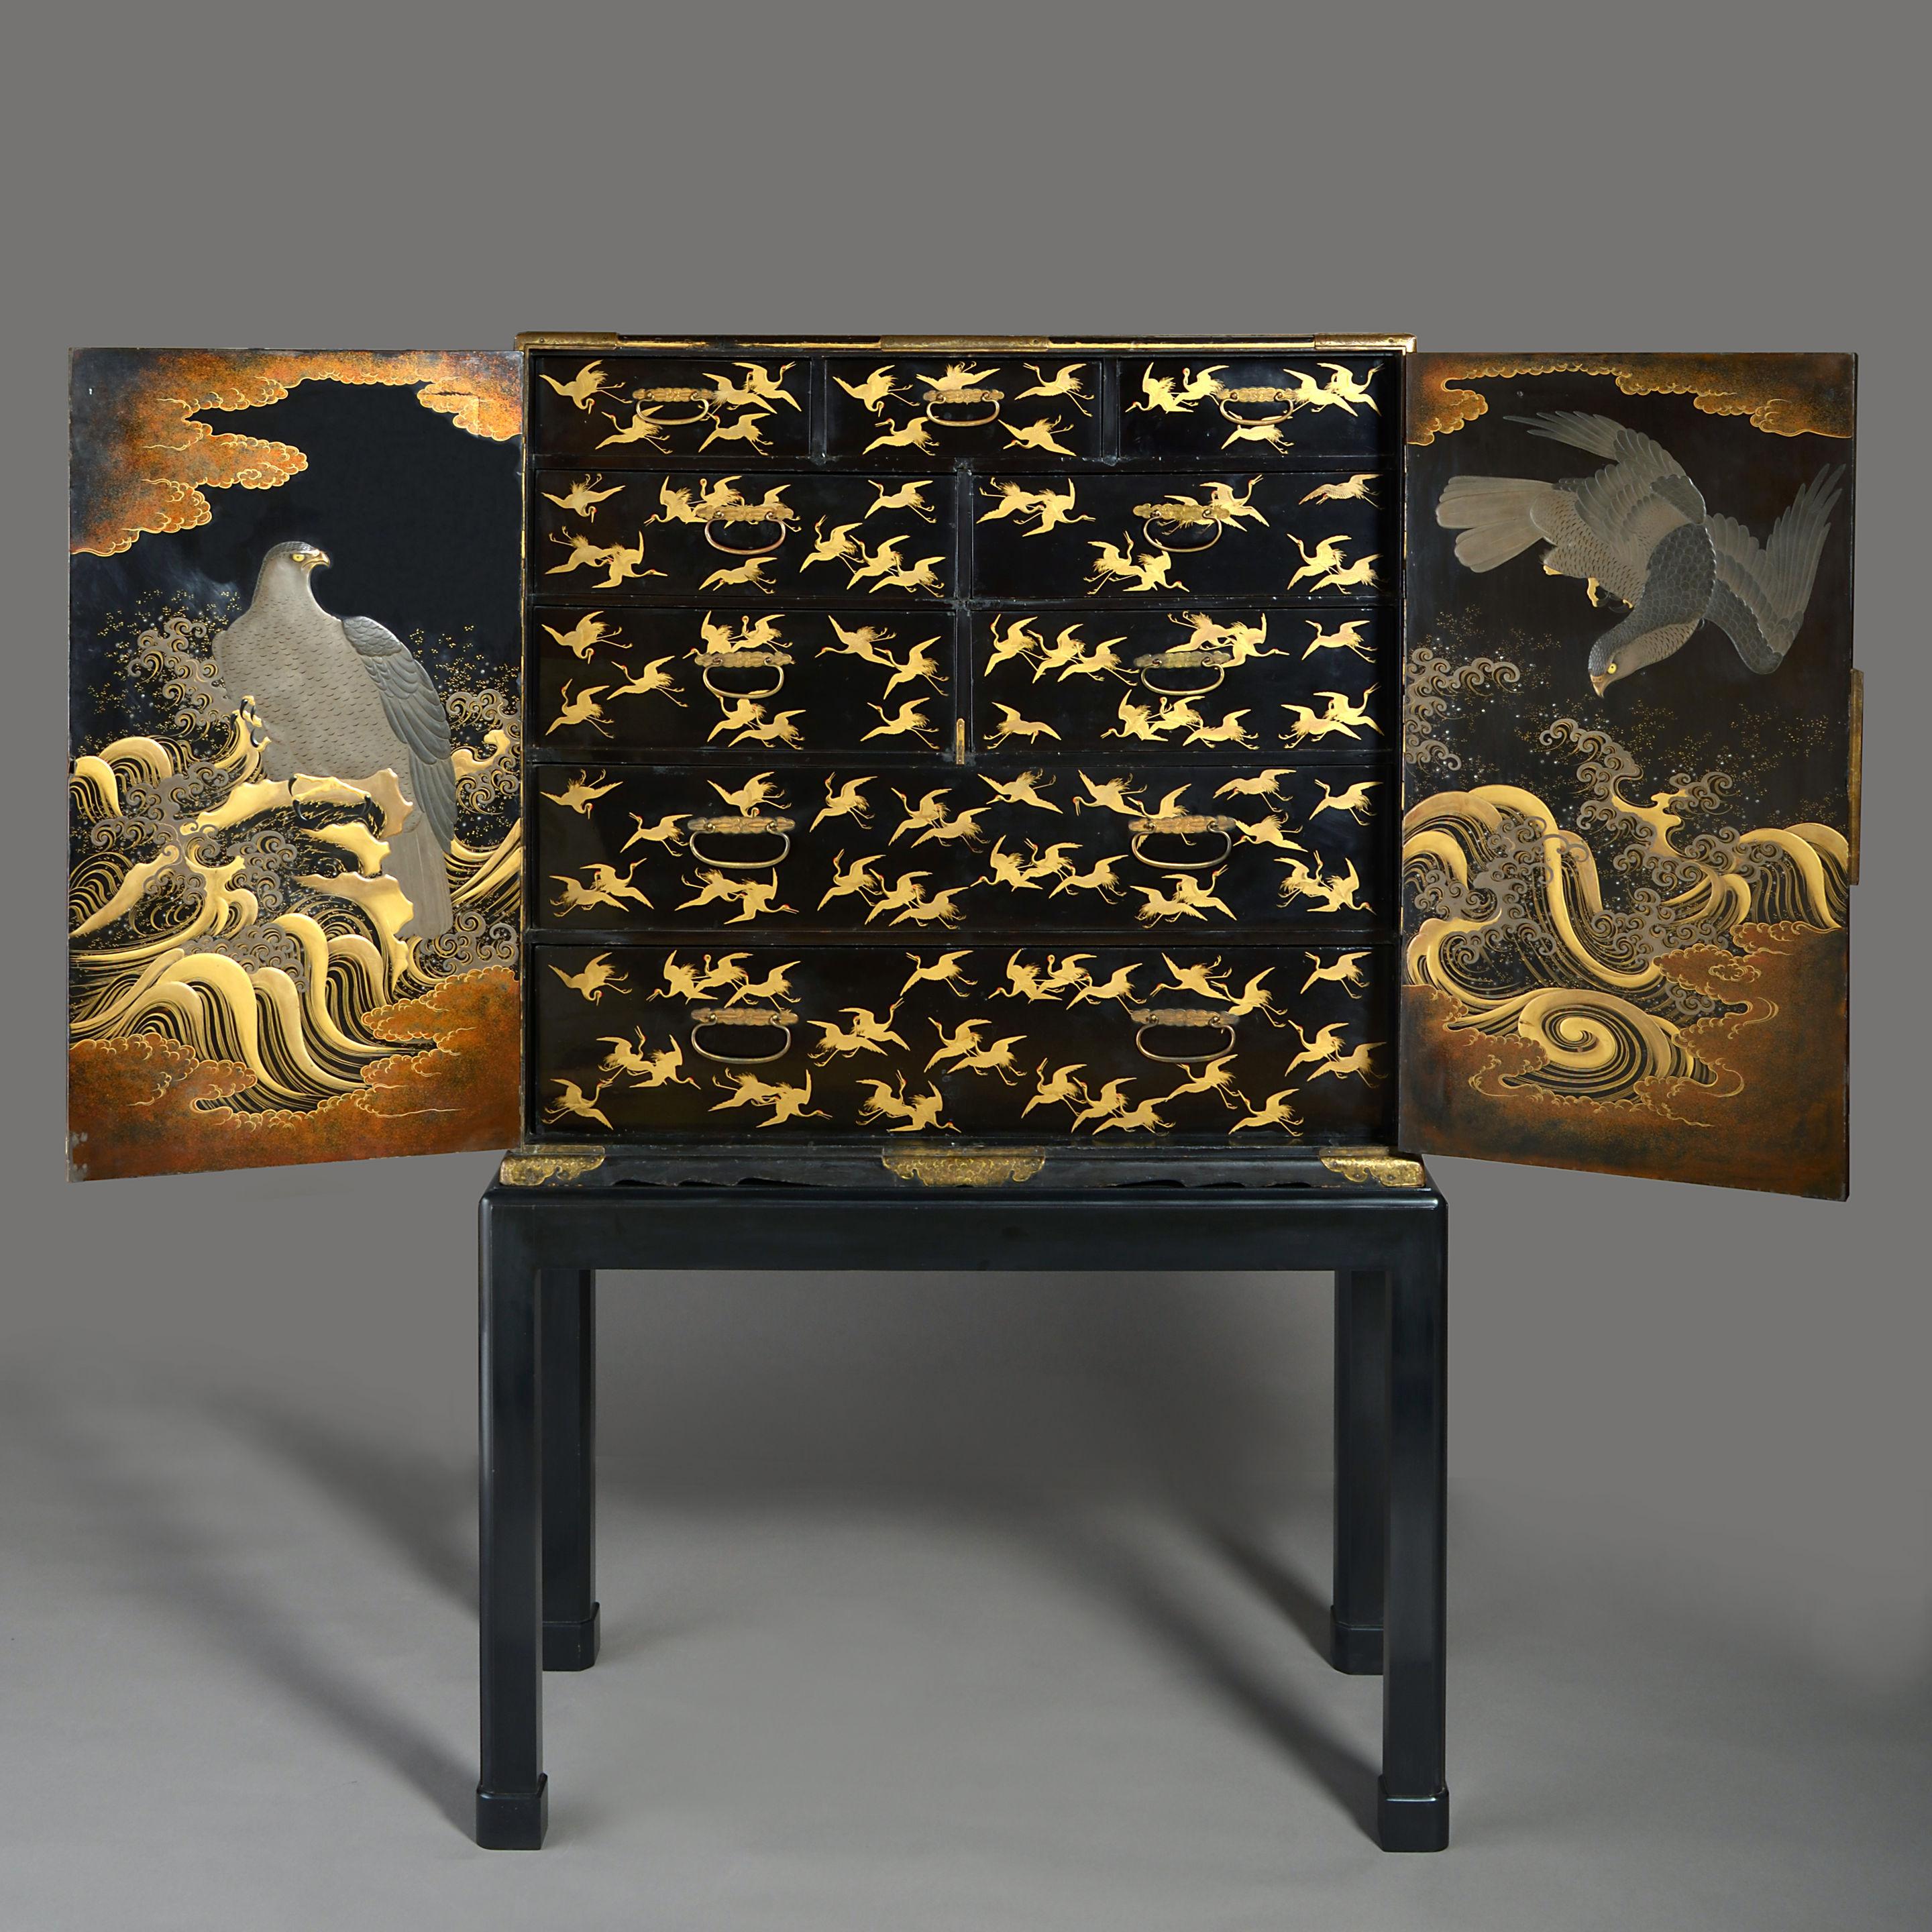 An early 19th century lacquer cabinet of great scale the front having two doors, each with a rectangular panel with re-entrant corners and decorated with a view of mount Fuji, a flock of cranes, before lowlands and a coast line with trading ships in